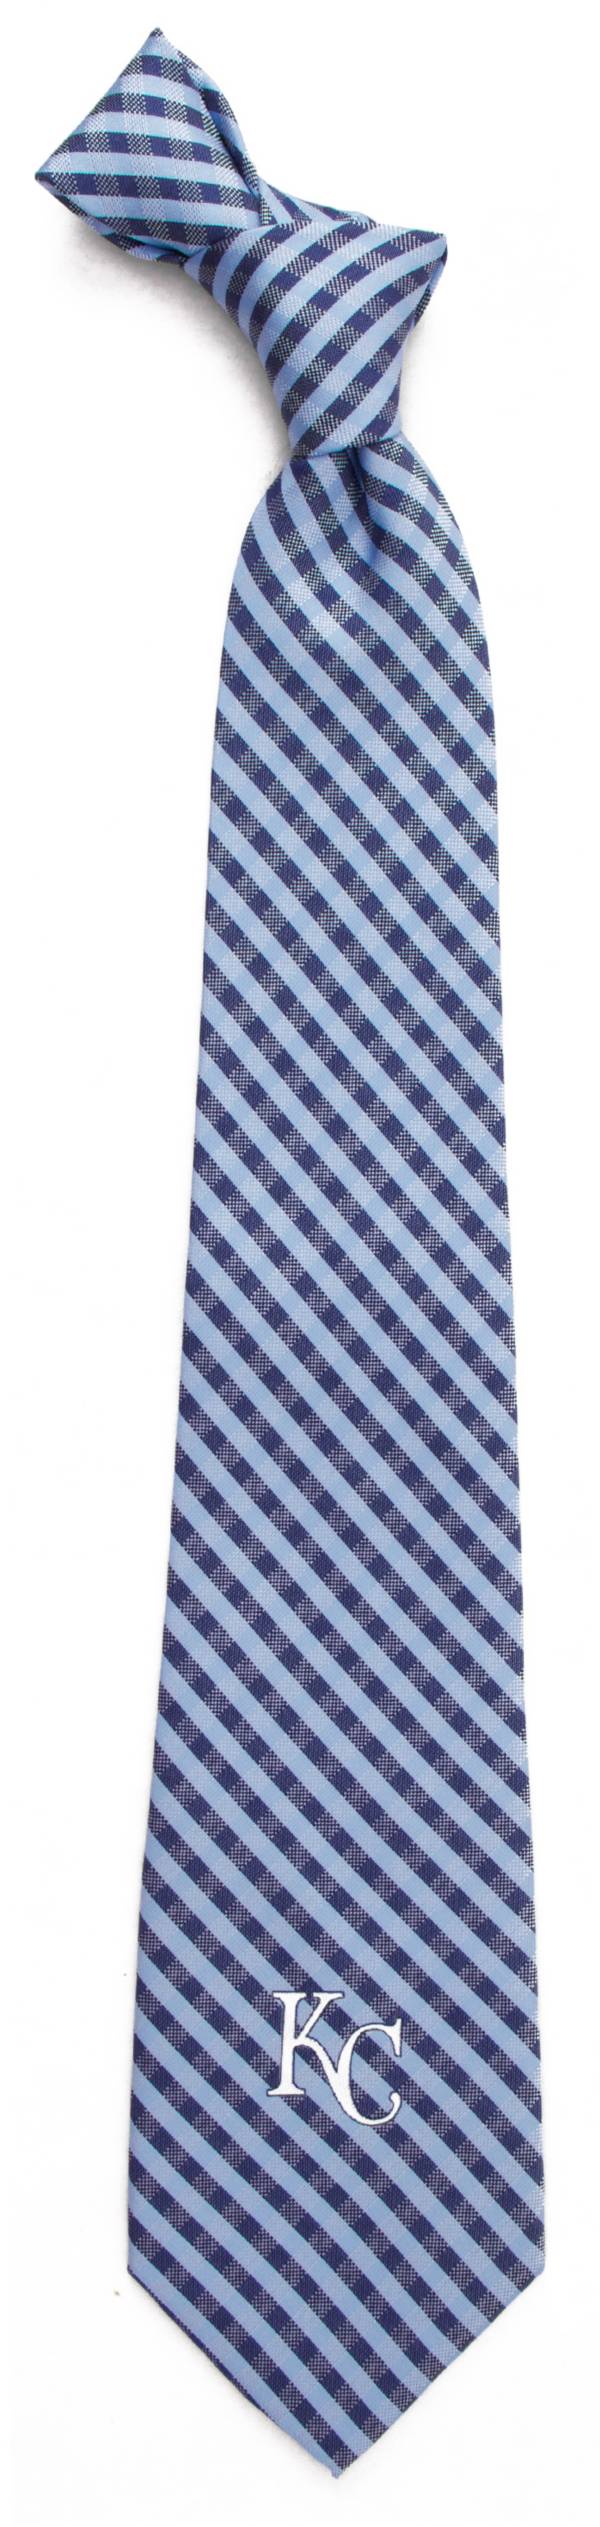 Eagles Wings Kansas City Royals Gingham Necktie product image